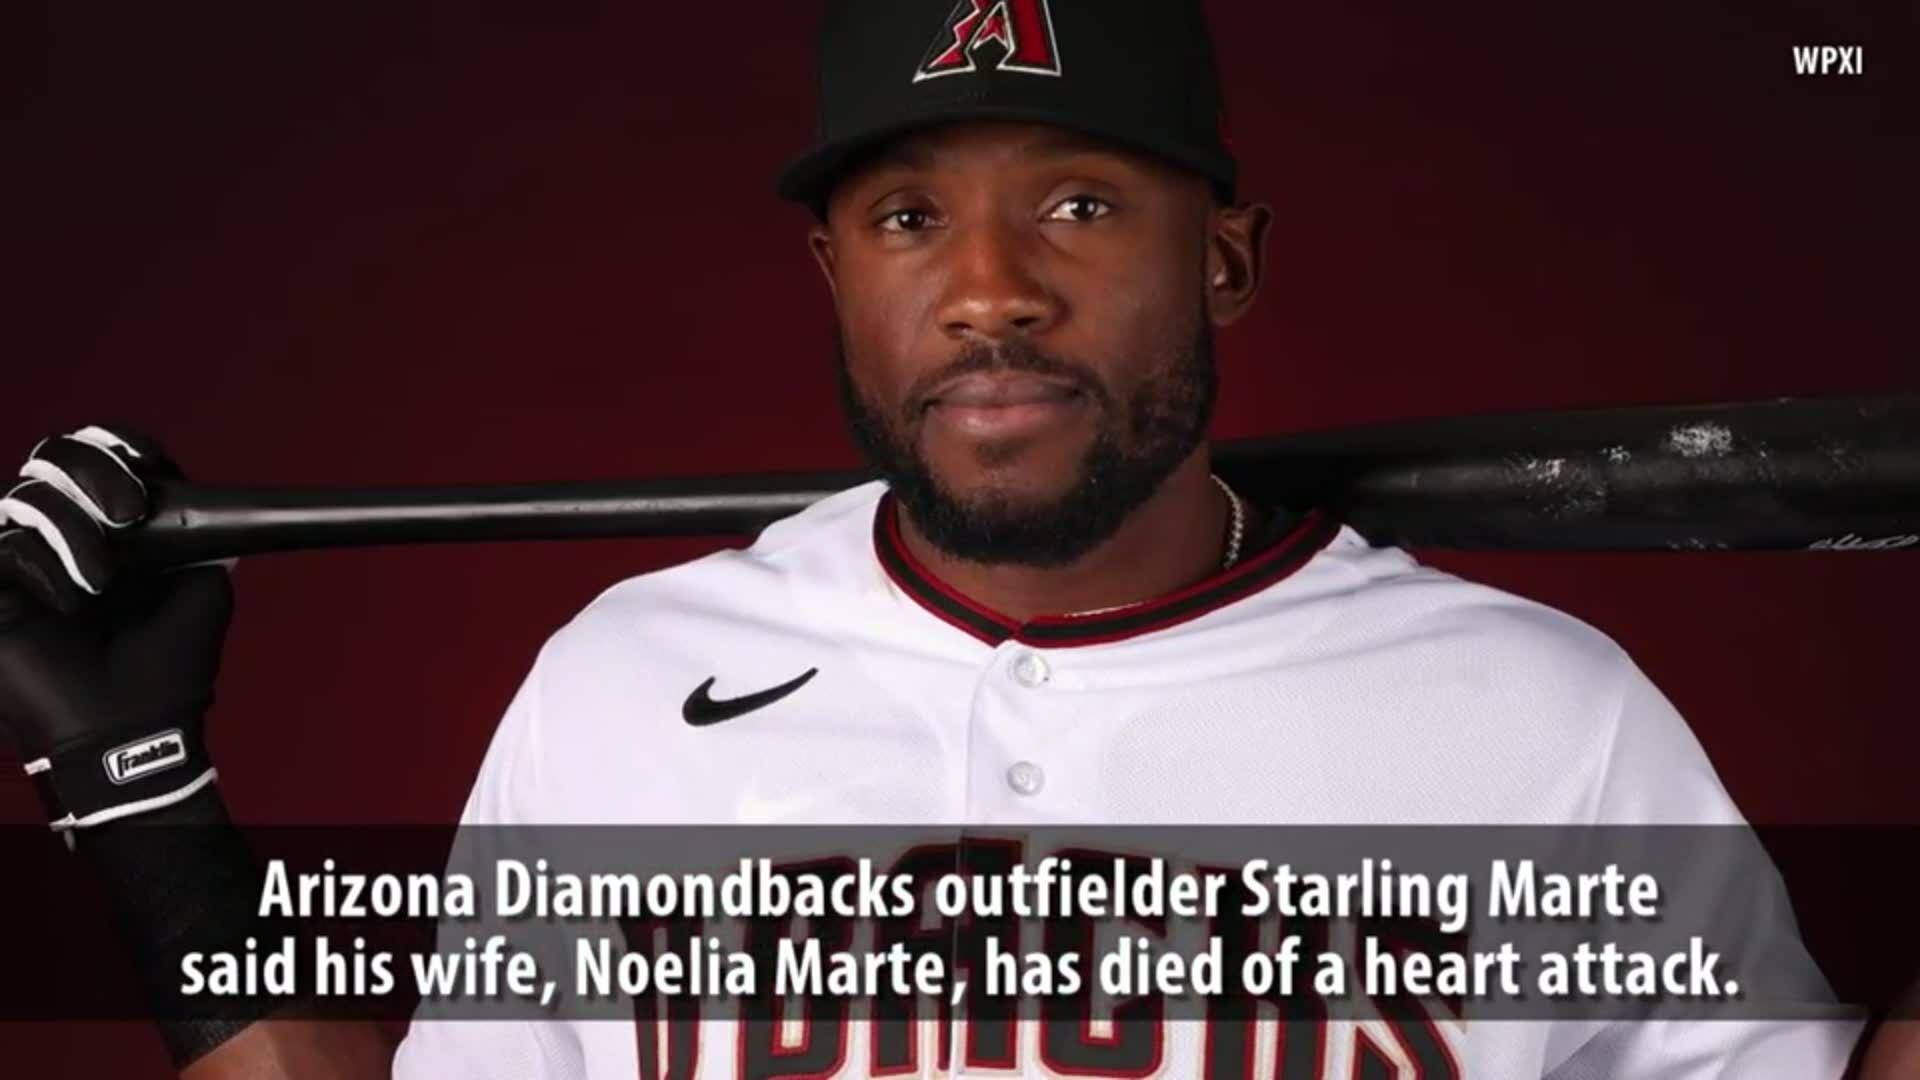 MLB outfielder Starling Marte reveals his wife died of a heart